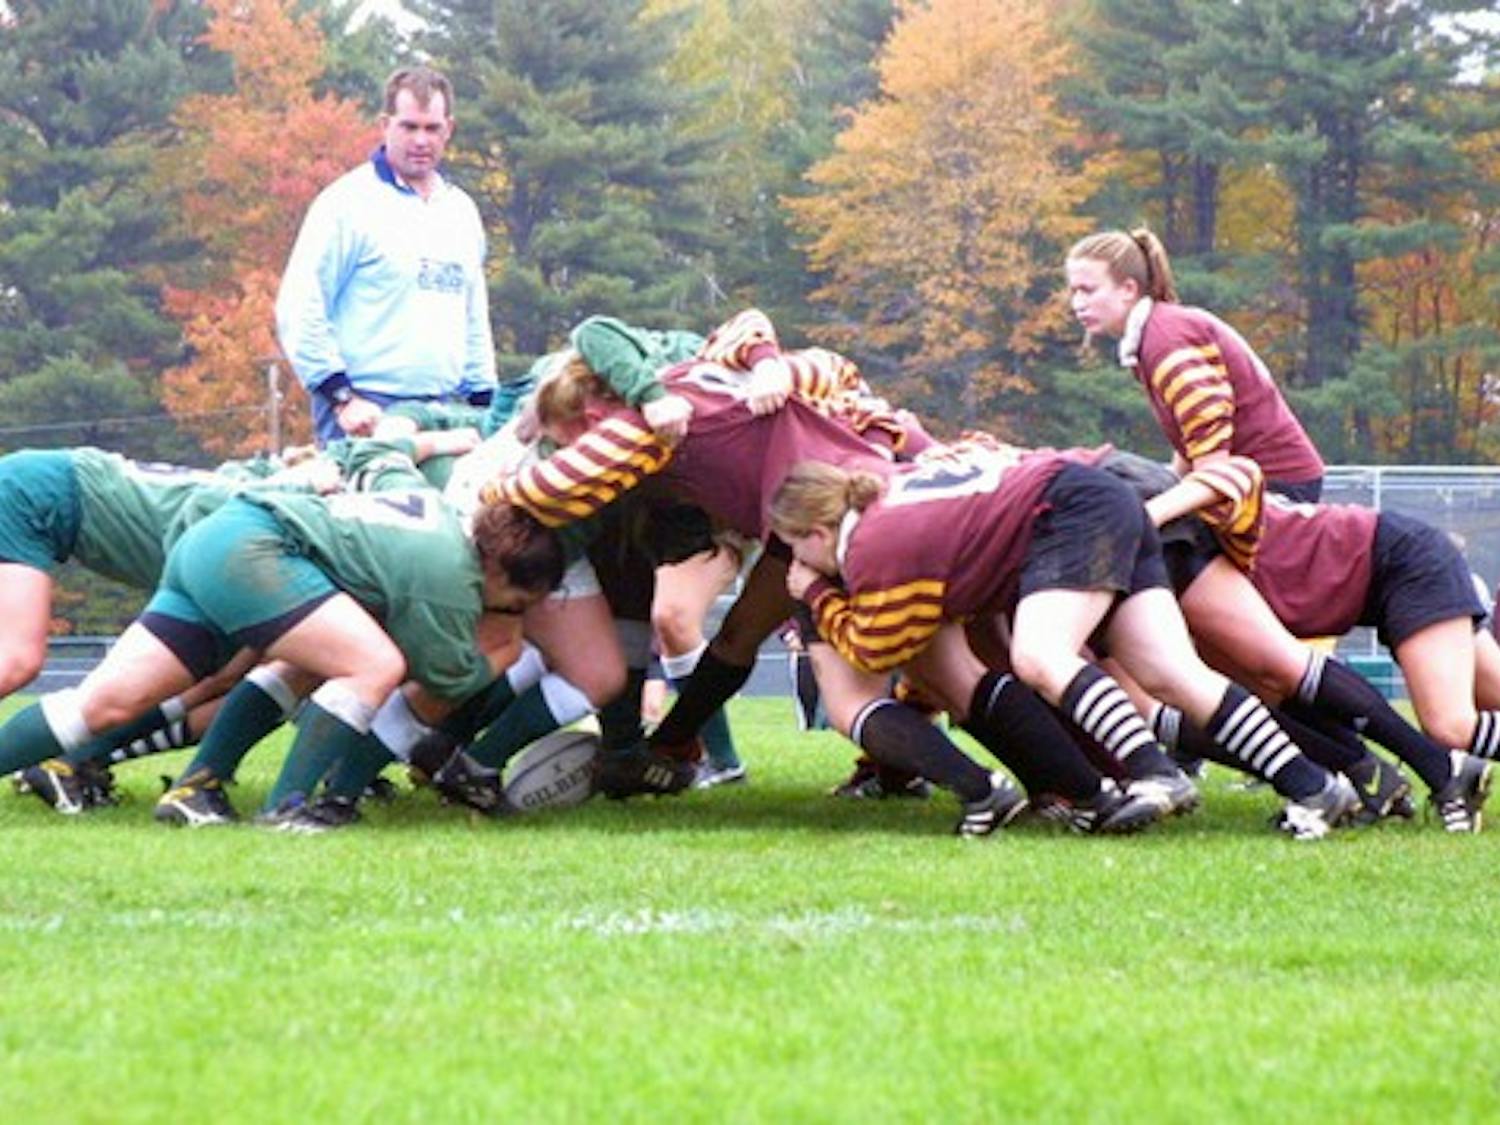 The Dartmouth women's rugby club dominated Harvard in the final game of the spring season, 66-5.